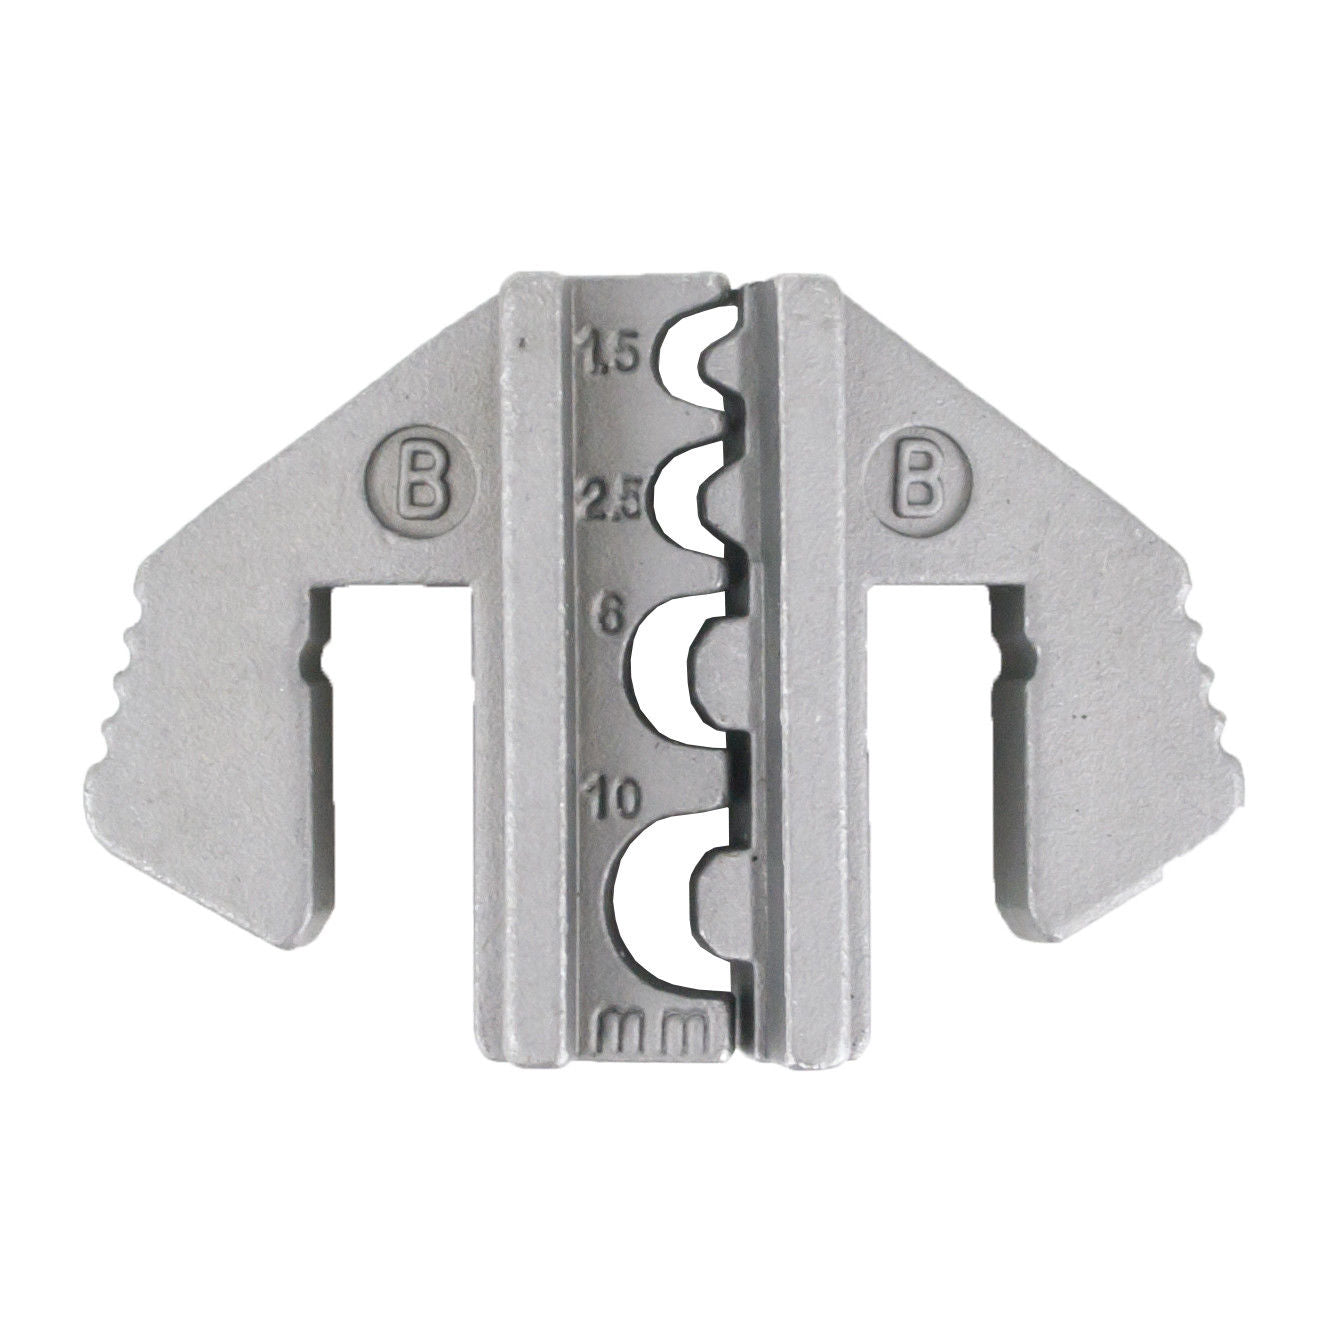 Crimping Tool Die - B Die for Non-Insulated Terminals AWG 20-18/16-14/12-10/8